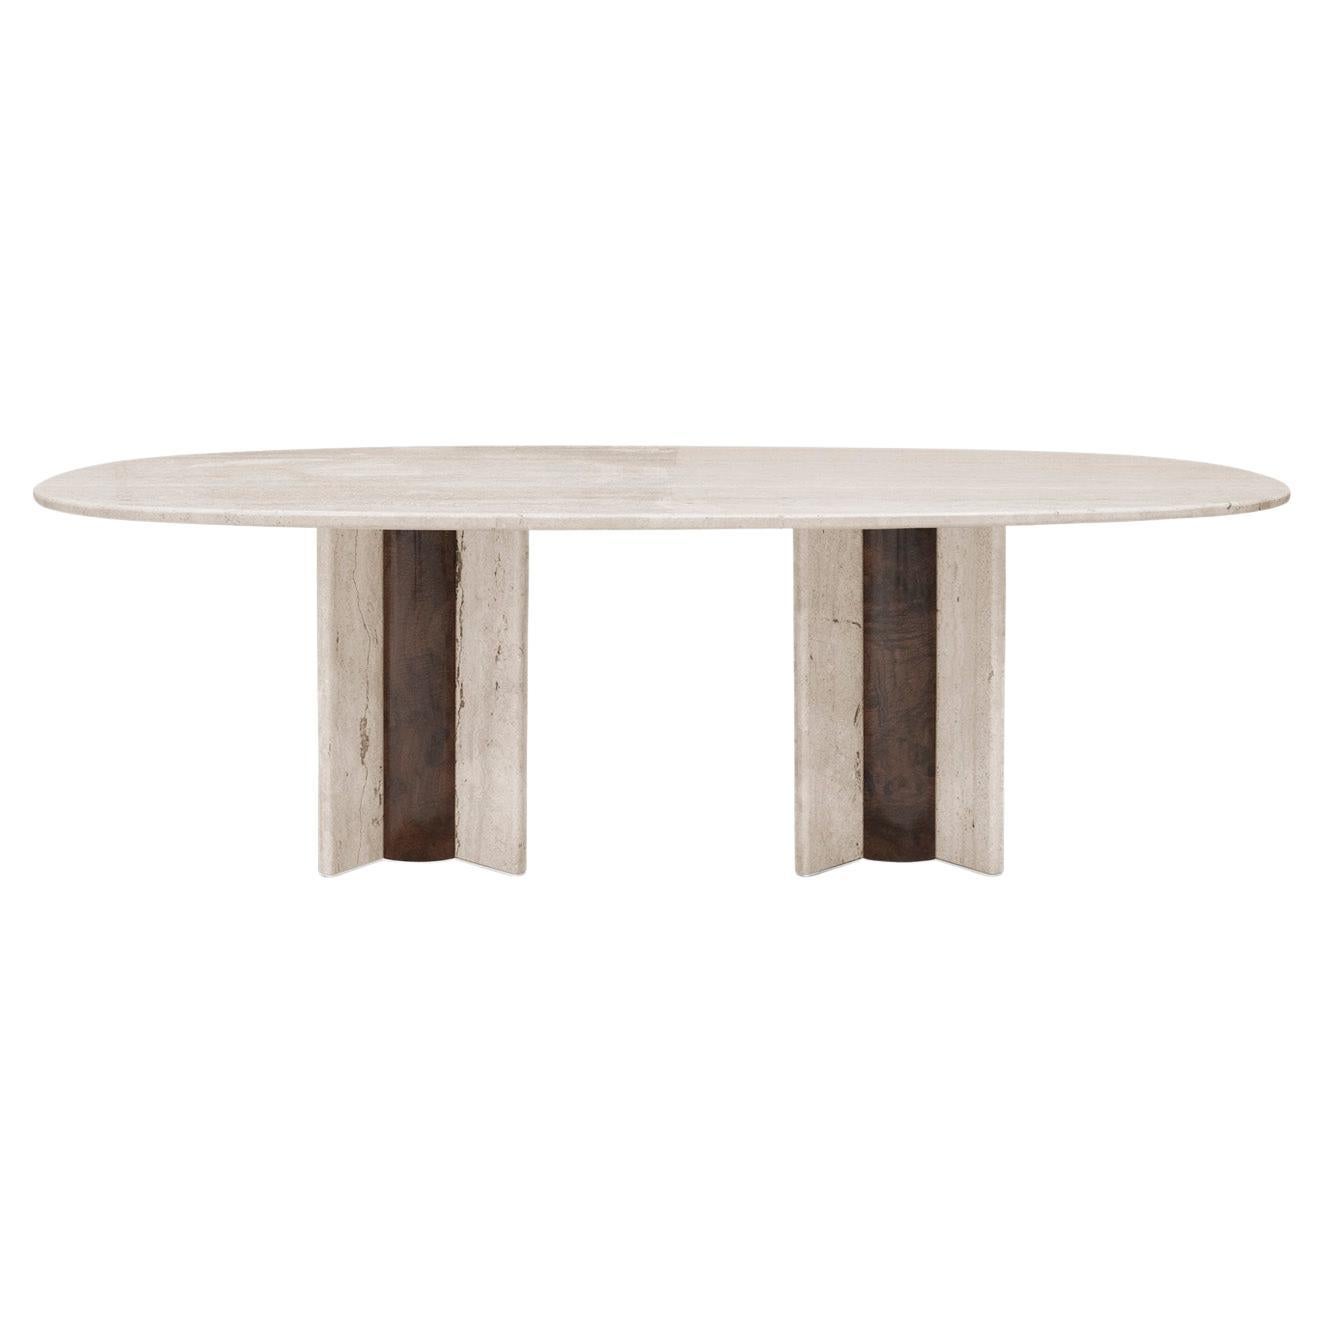 Paris Travertine Marble Oval Dining Table